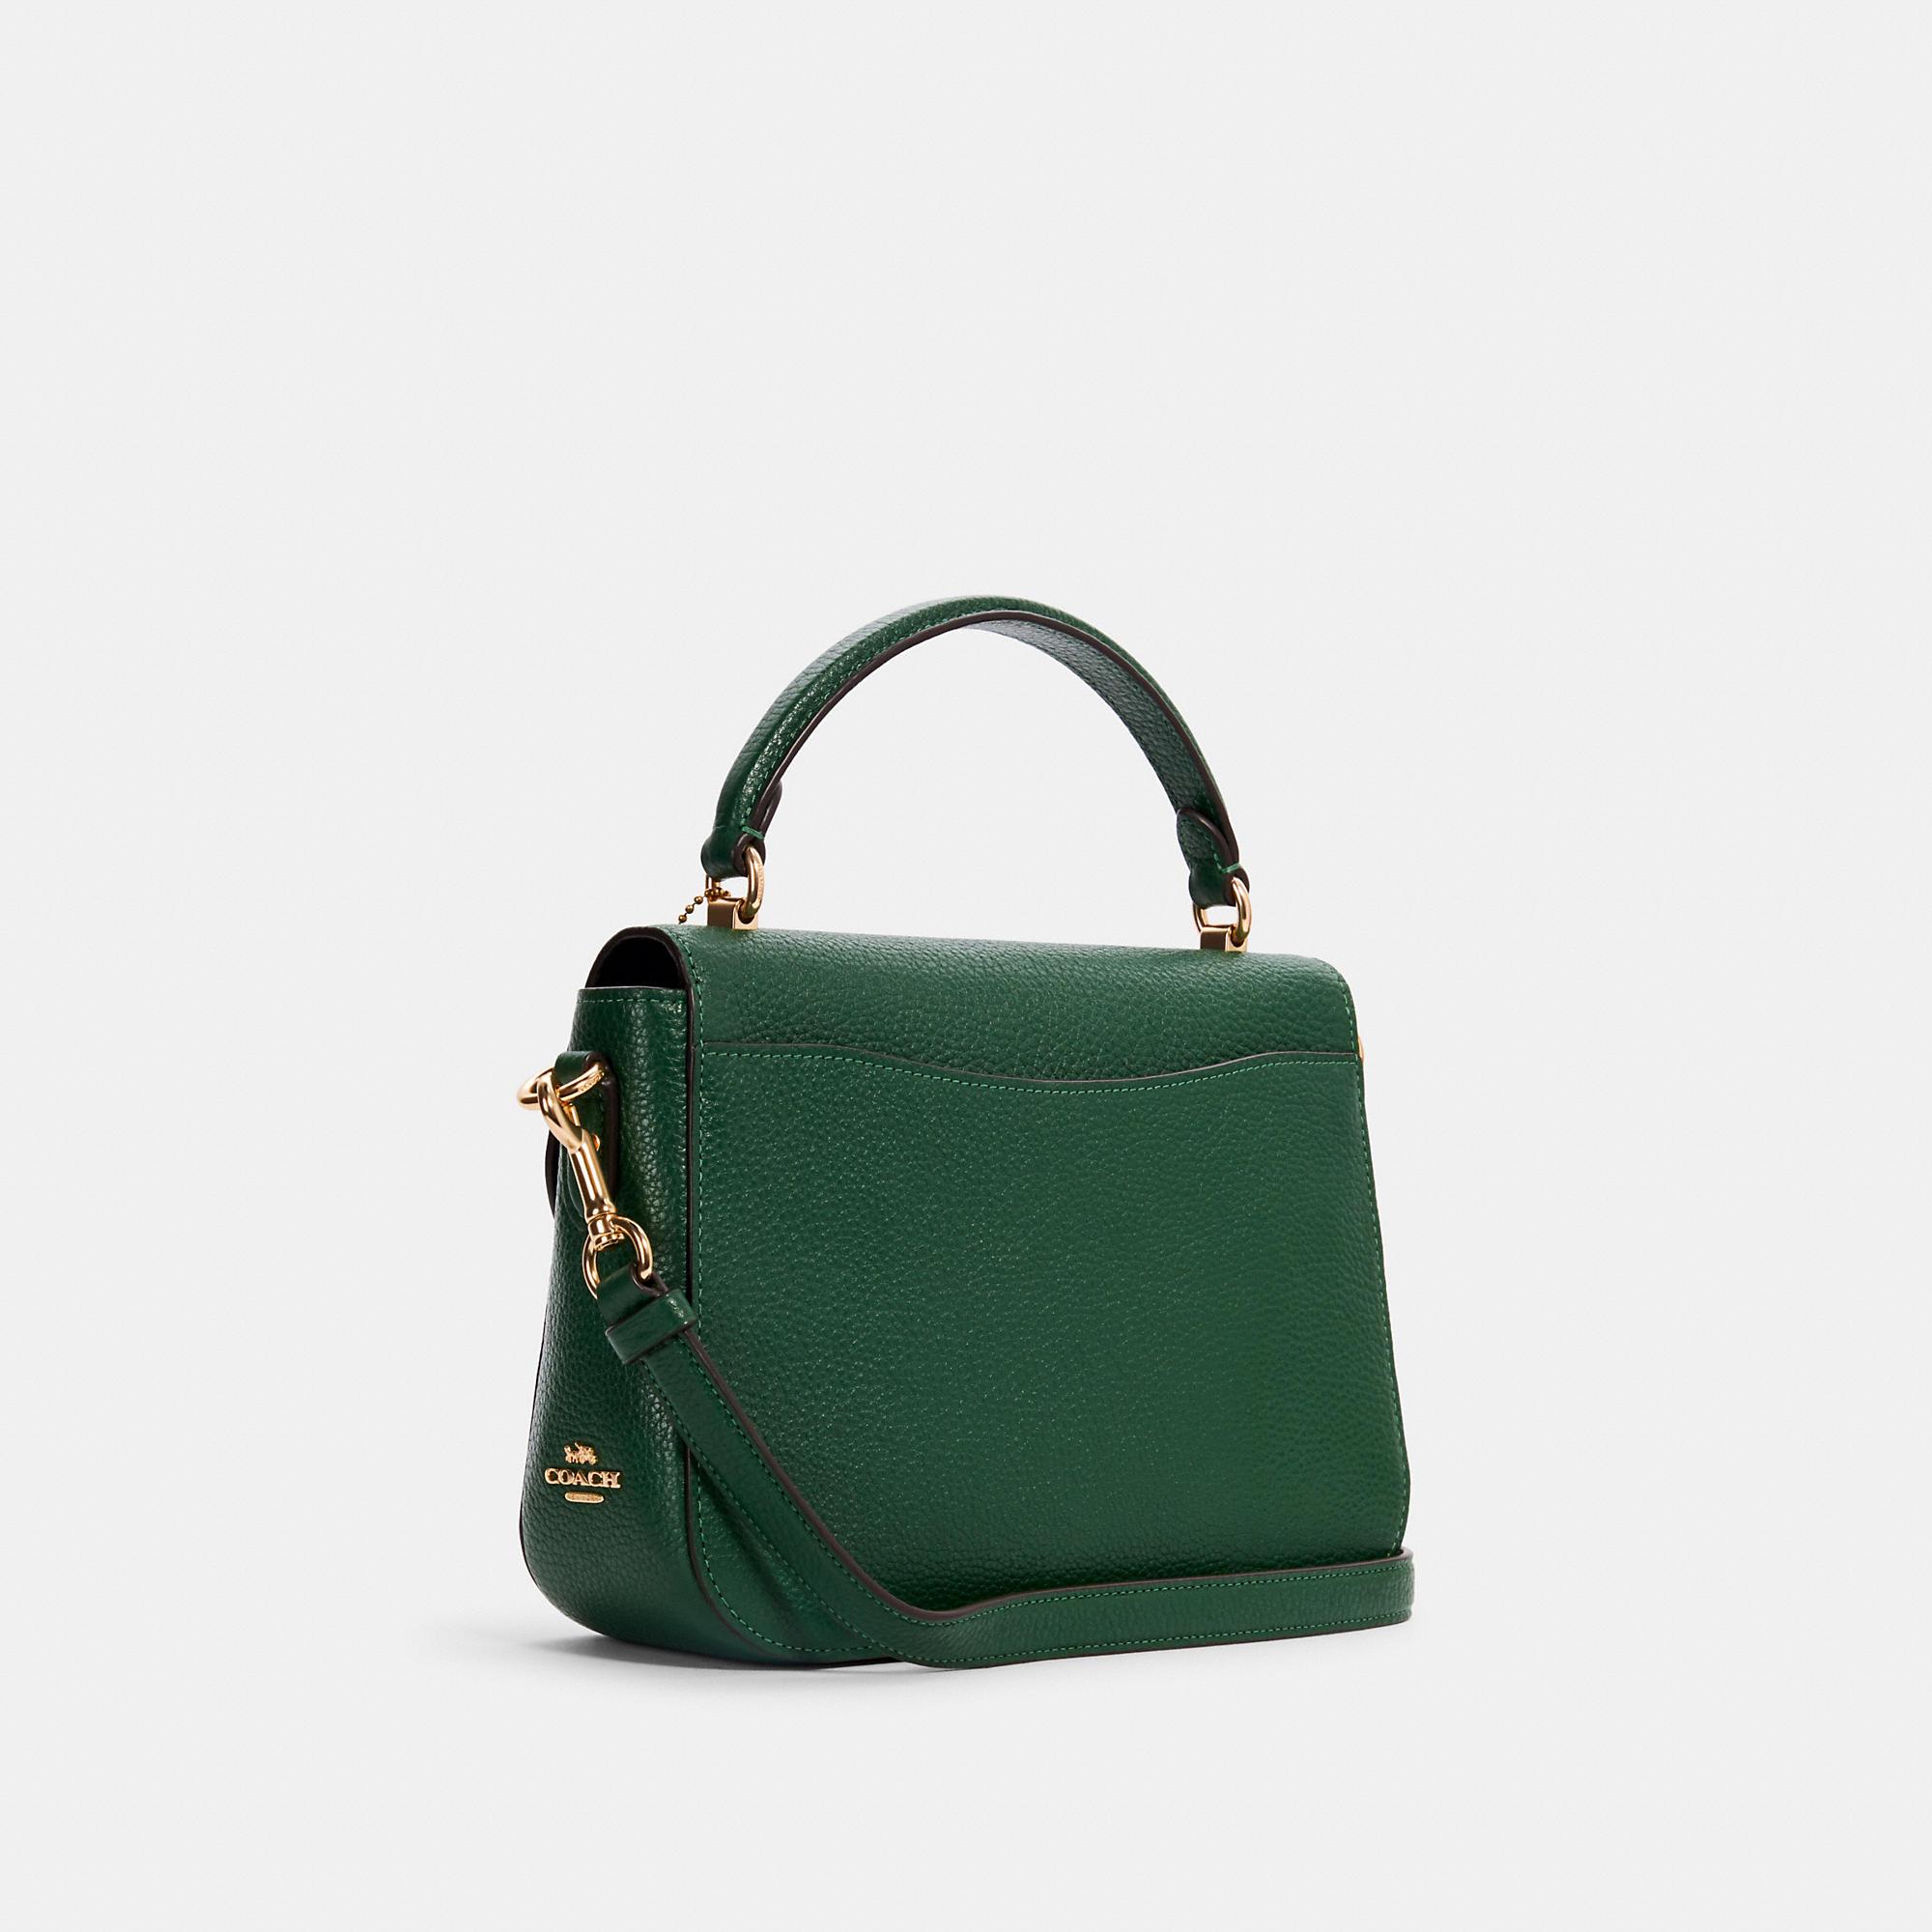 COACH Leather Marlie Top Handle Bag Satchel in Green - Lyst